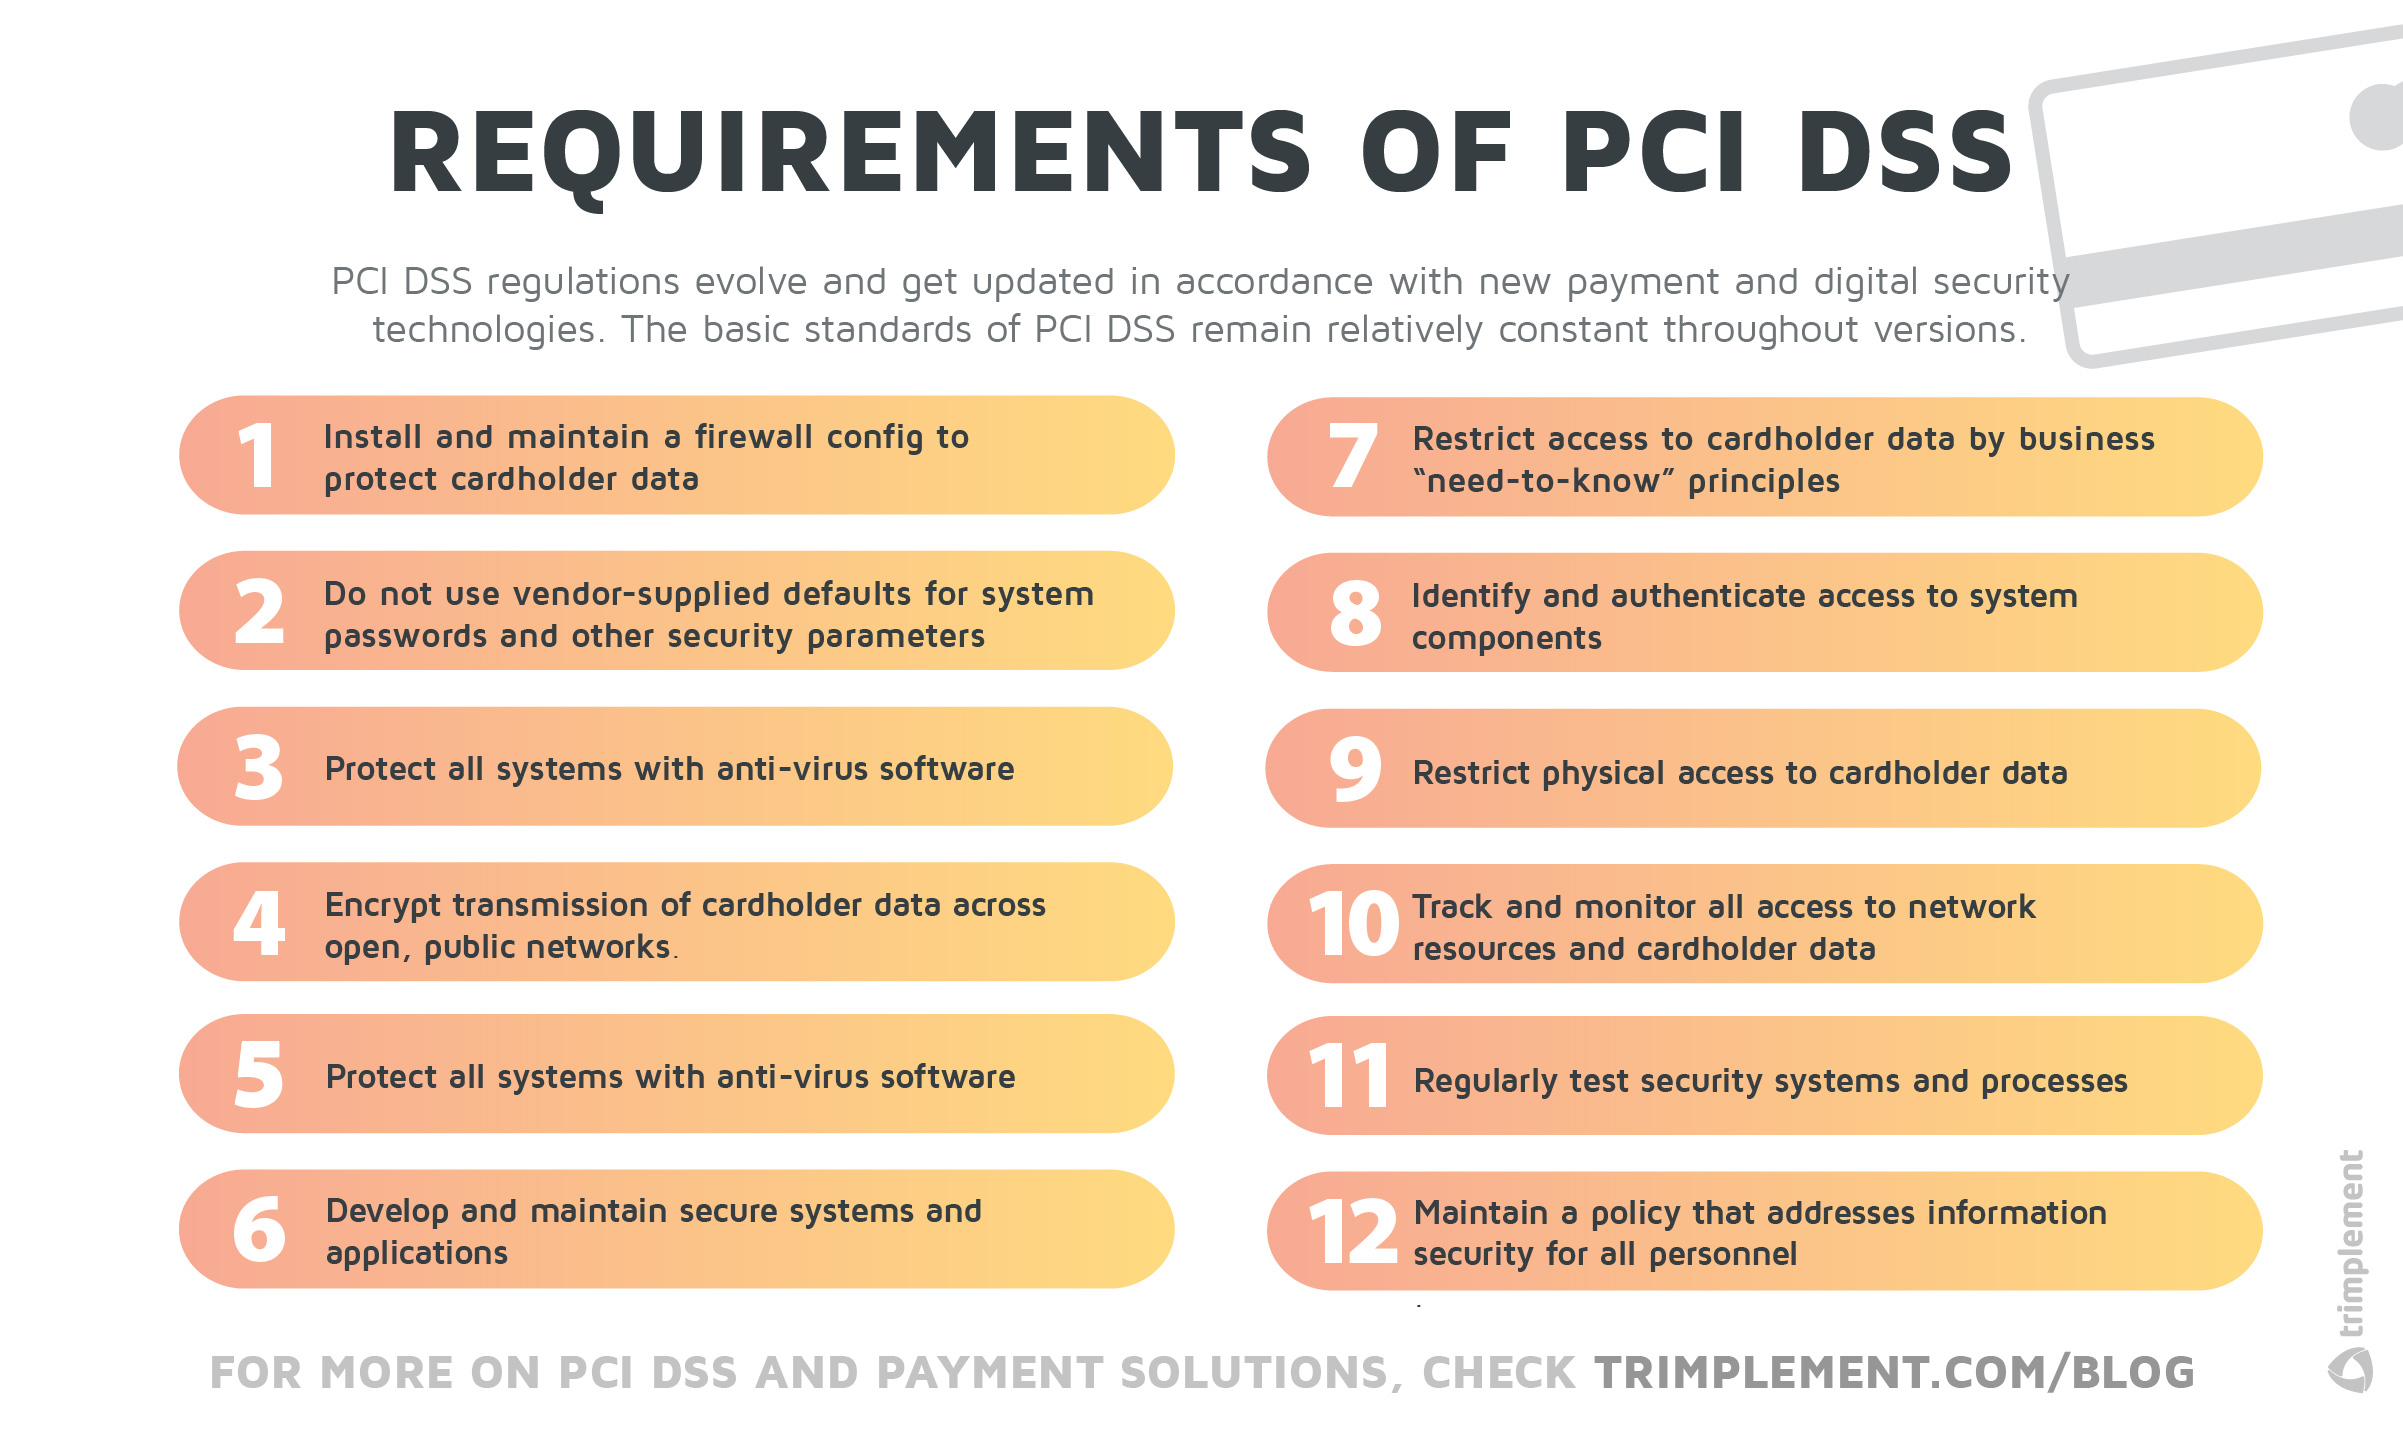 A diagram showing the 12 requirements of PCI DSS